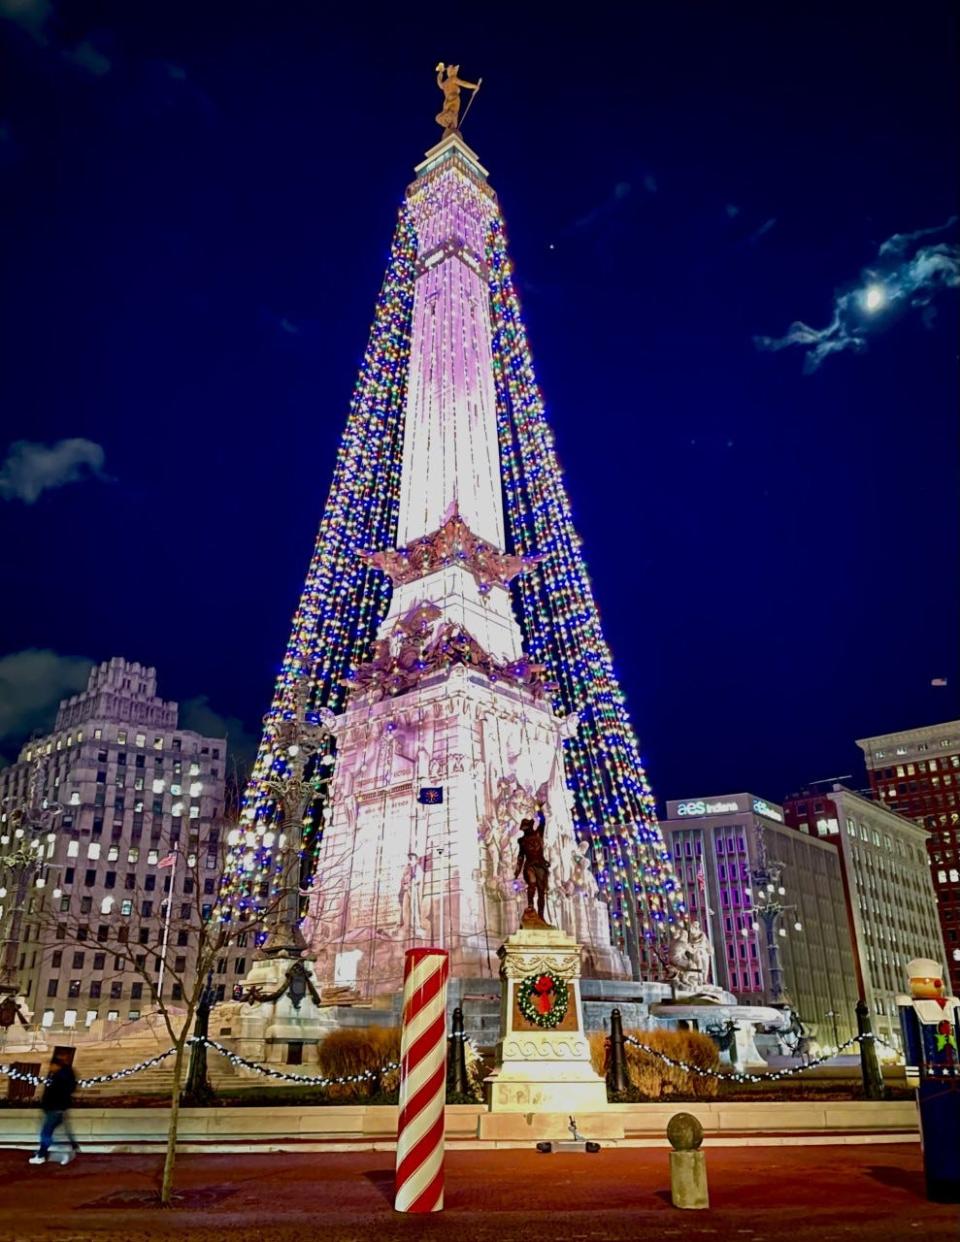 Indianapolis' Soldiers and Sailors Monument is turned into a giant Christmas tree during Circle of Lights.